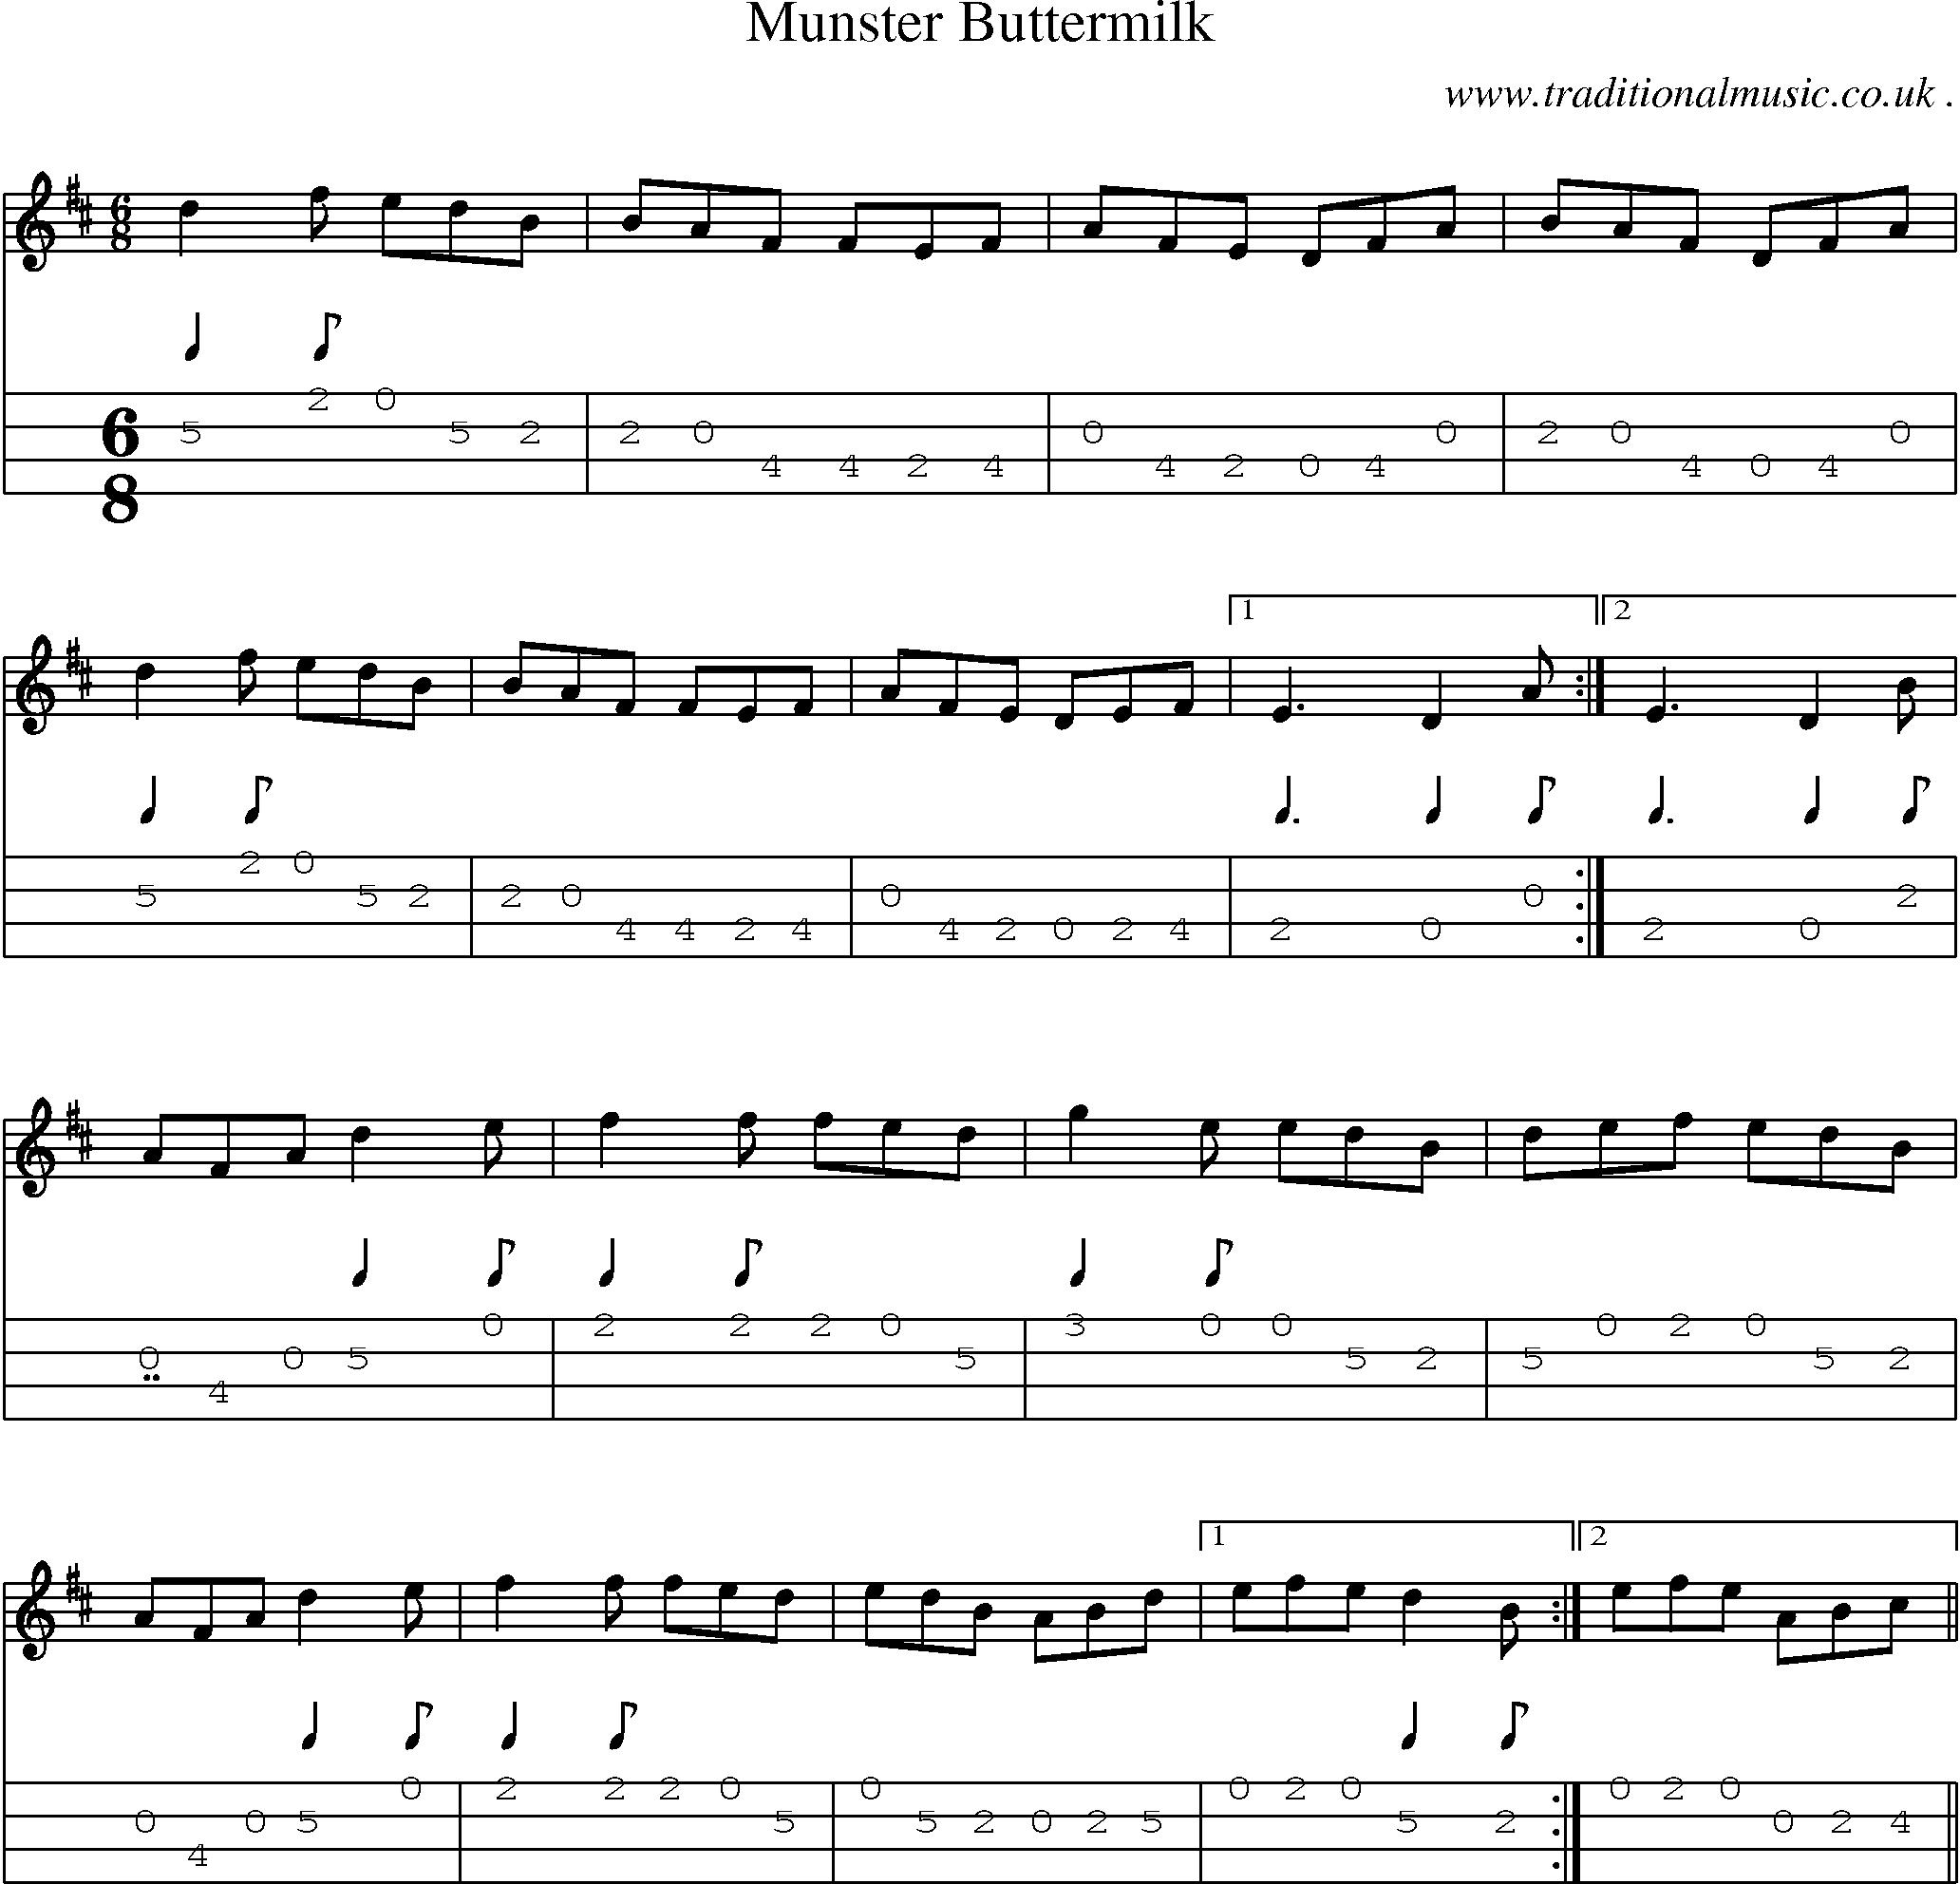 Sheet-Music and Mandolin Tabs for Munster Buttermilk